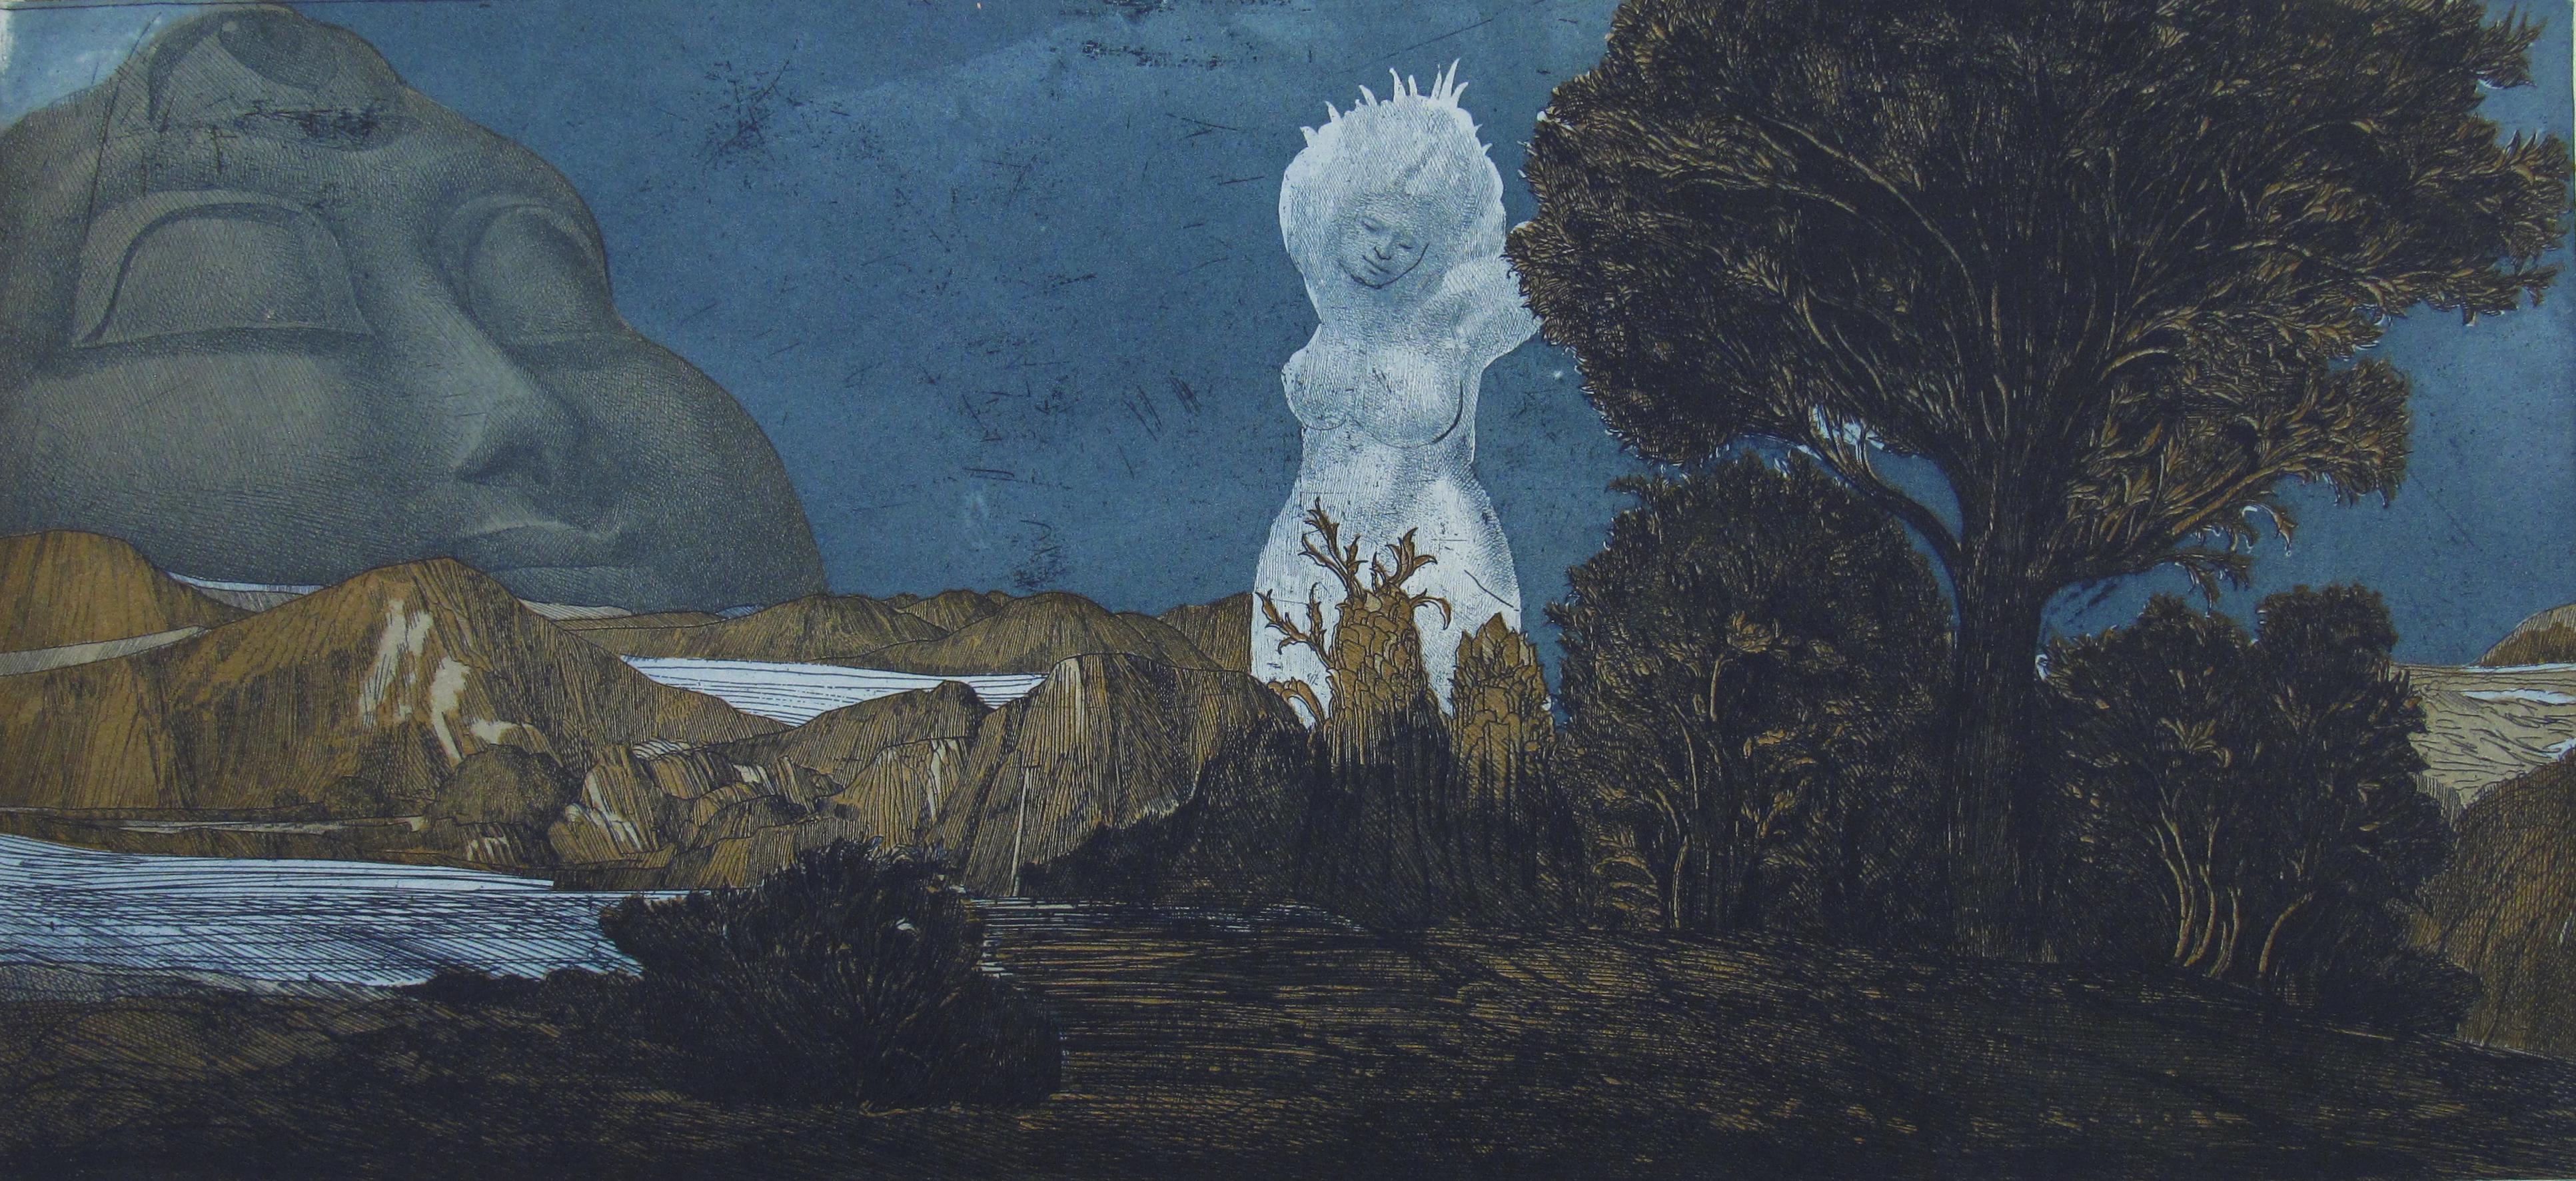 Ernst Fuchs
(Austrian, 1930 - 2015)

Zyklopische Landschaft, 1967
(Cyclopean Landscape)

•	Coloured Aquatint etching on rag paper (Prob. French Arches paper)
•	Sheet ca. 31.5 x 56 cm
•	Plate, ca. 22.5 x 48 cm
•	Signed bottom right
•	Inscribed in